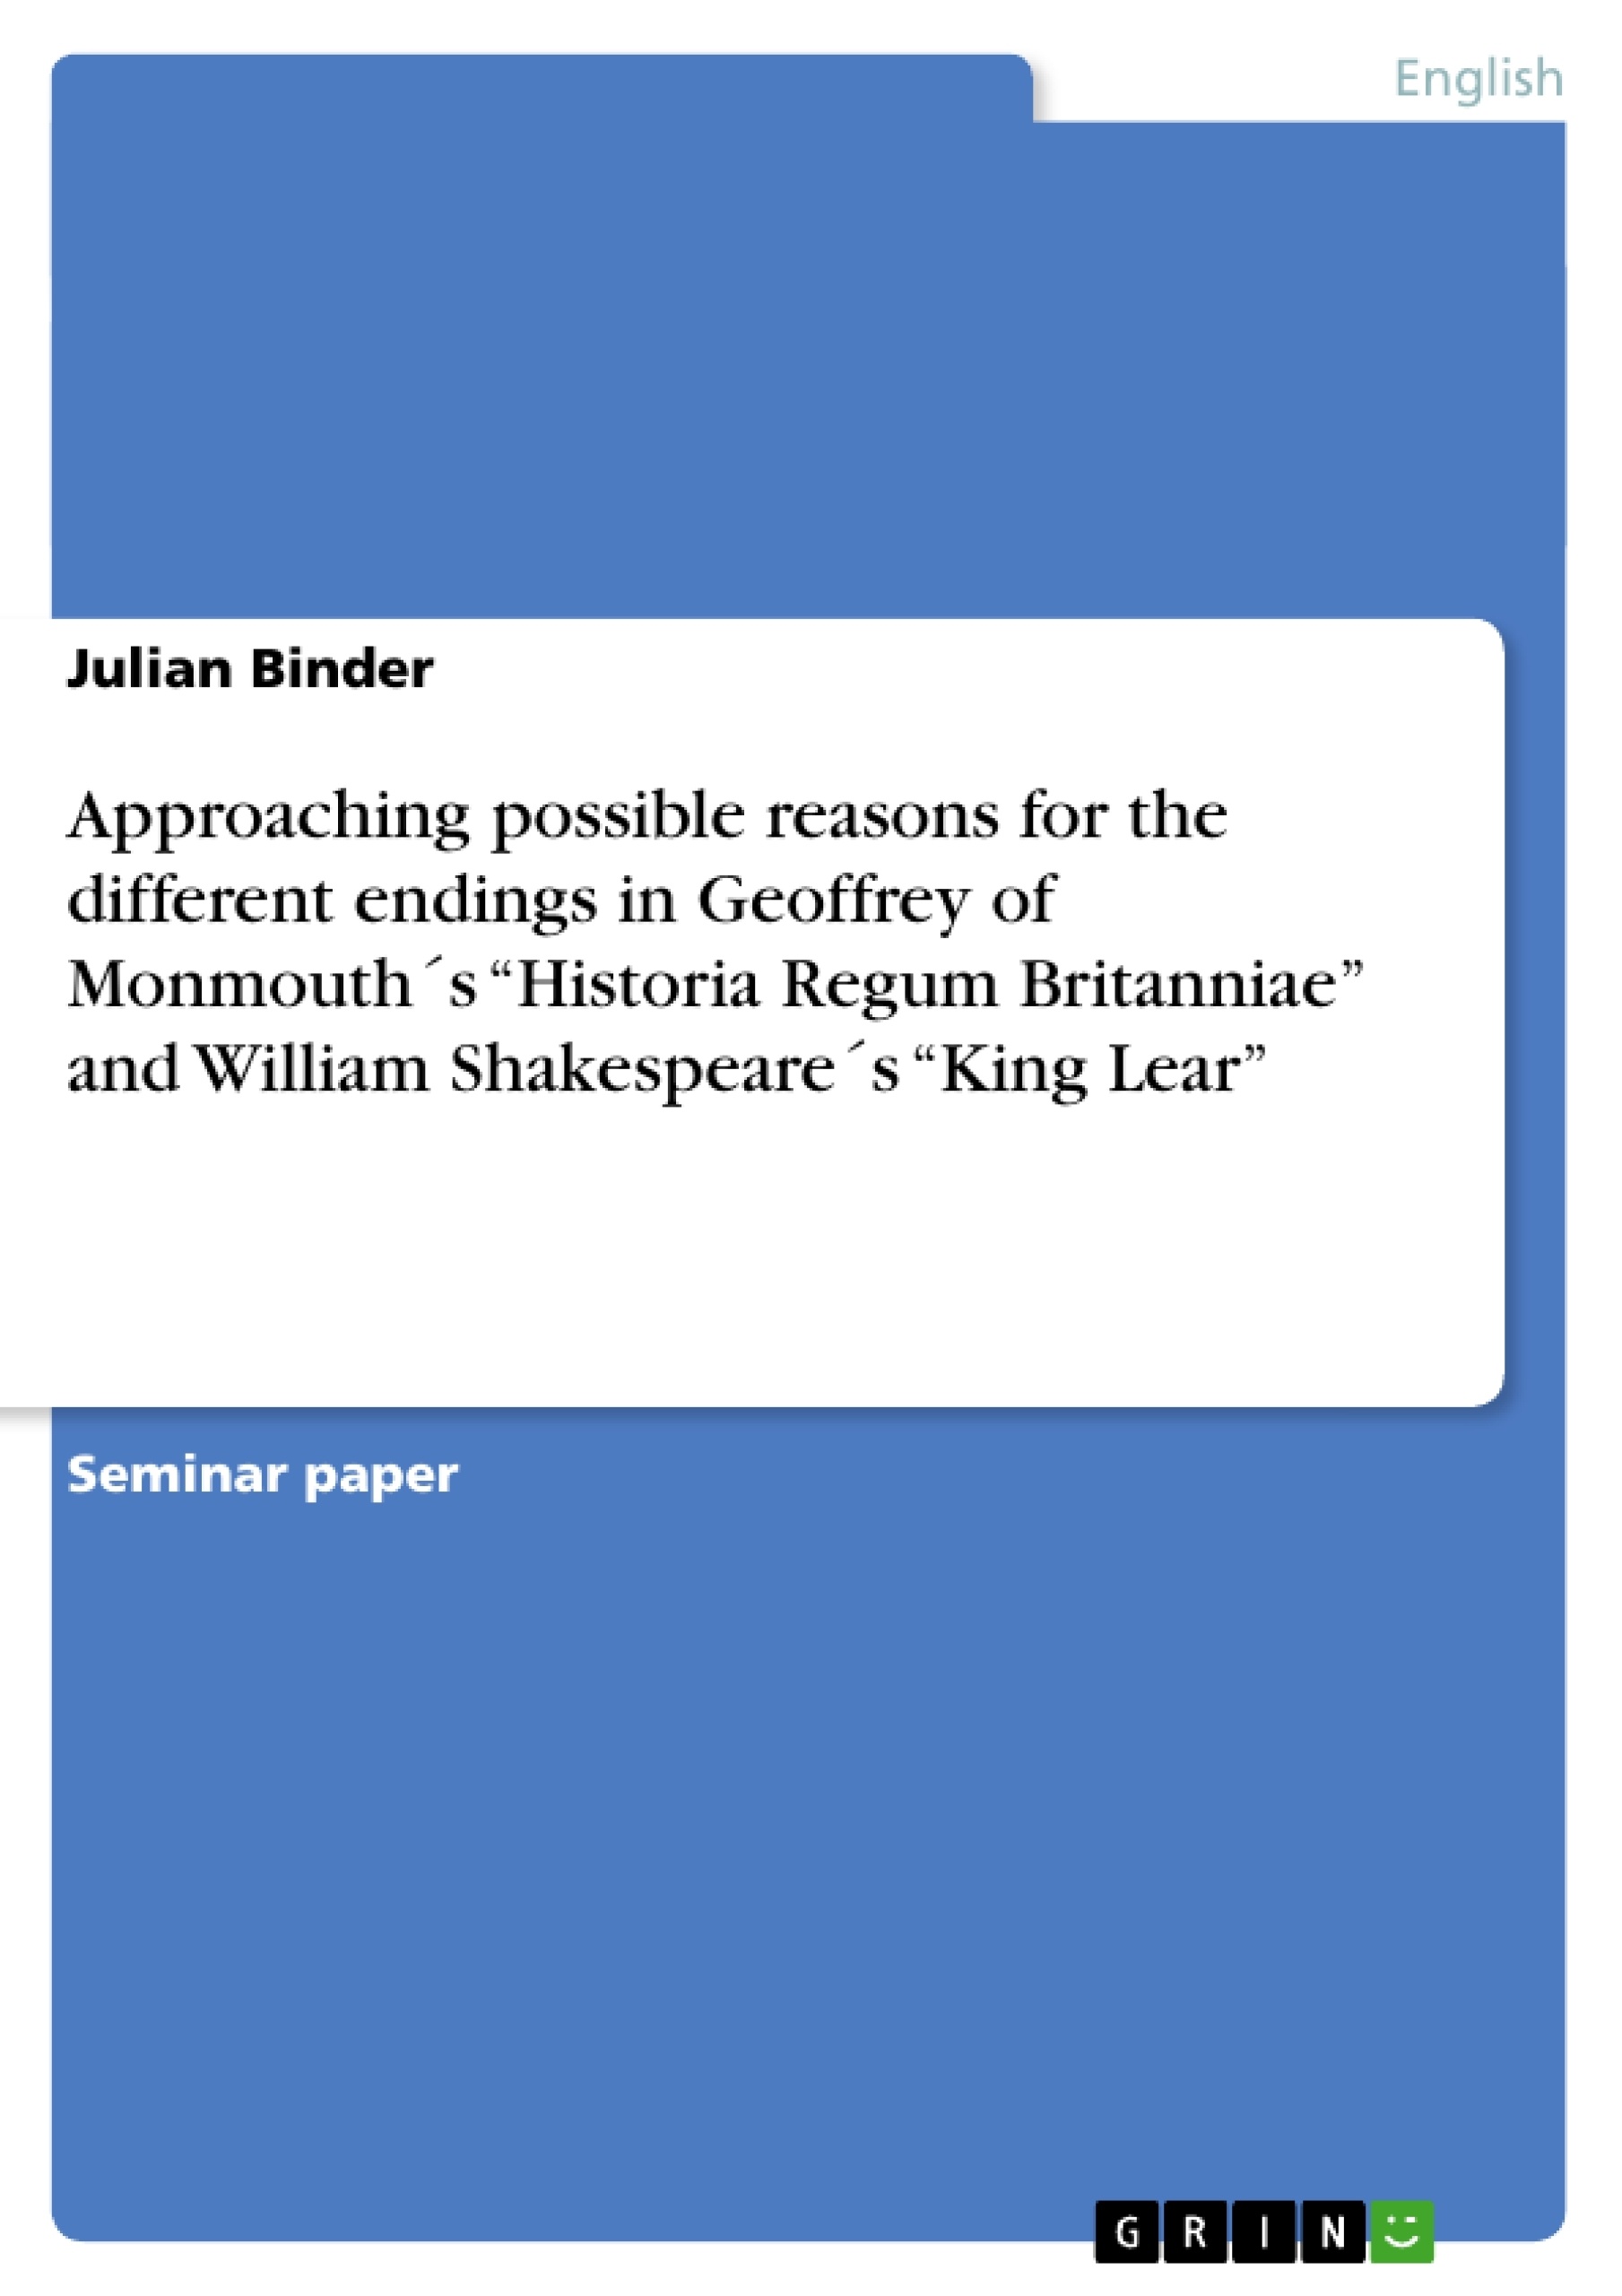 Title: Approaching possible reasons for the different endings in Geoffrey of Monmouth´s “Historia Regum Britanniae”  and   William Shakespeare´s “King Lear”